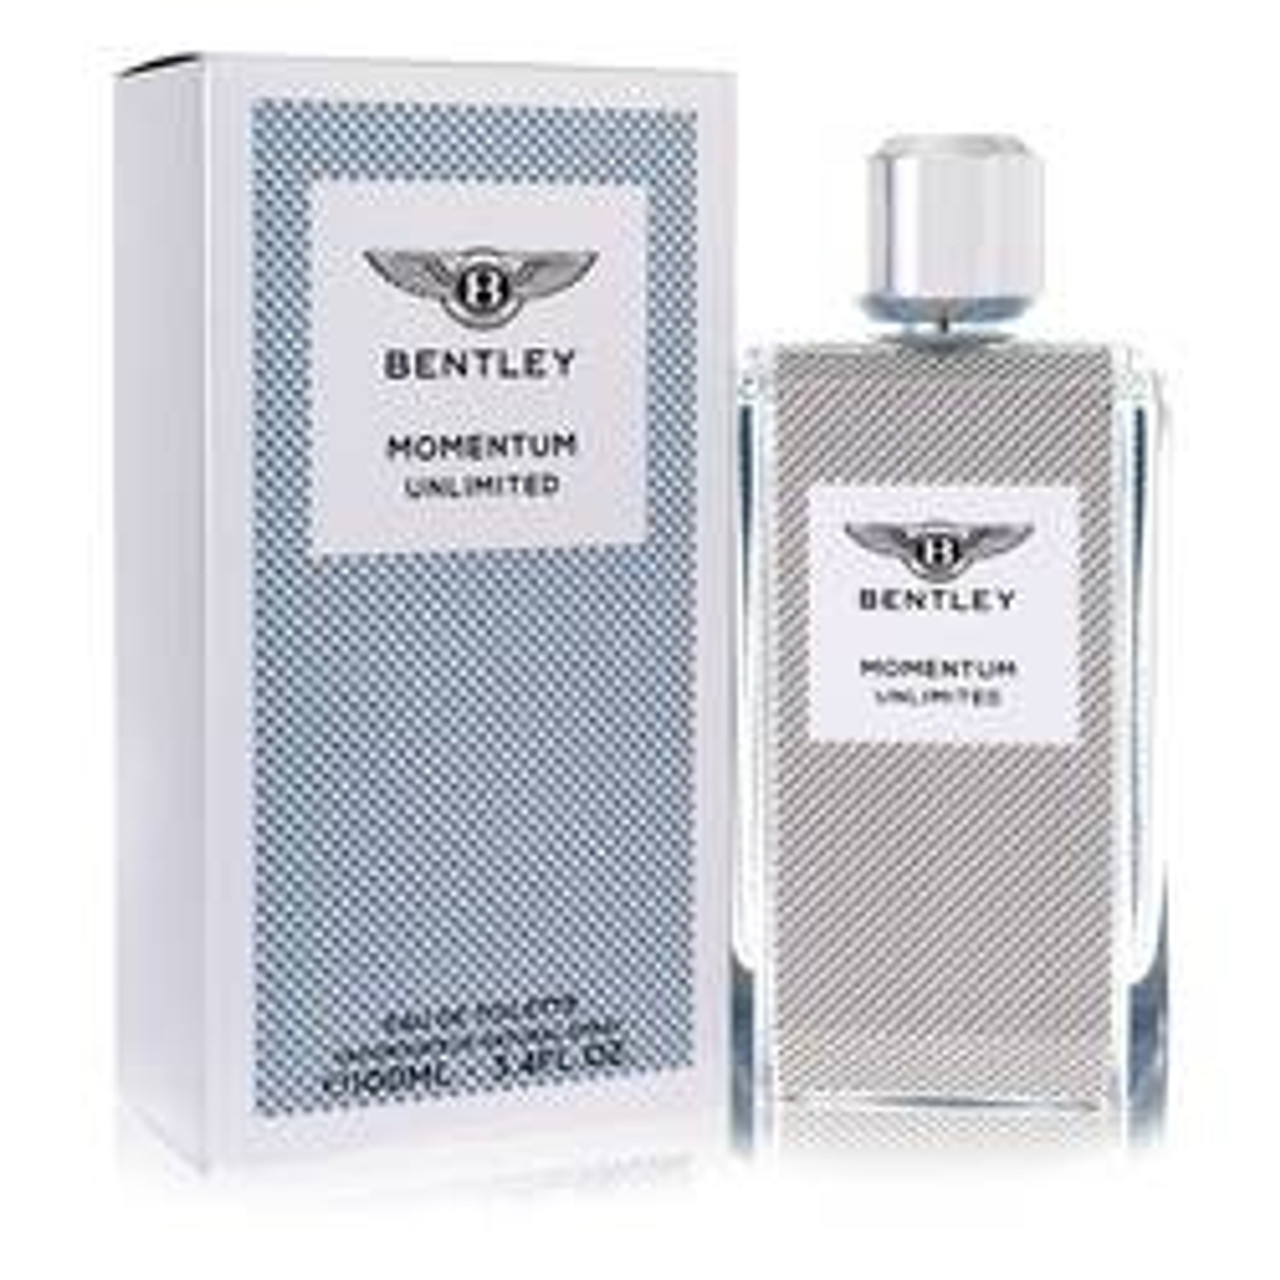 Bentley Momentum Unlimited Cologne By Bentley Eau De Toilette Spray 3.4 oz for Men - [From 79.50 - Choose pk Qty ] - *Ships from Miami